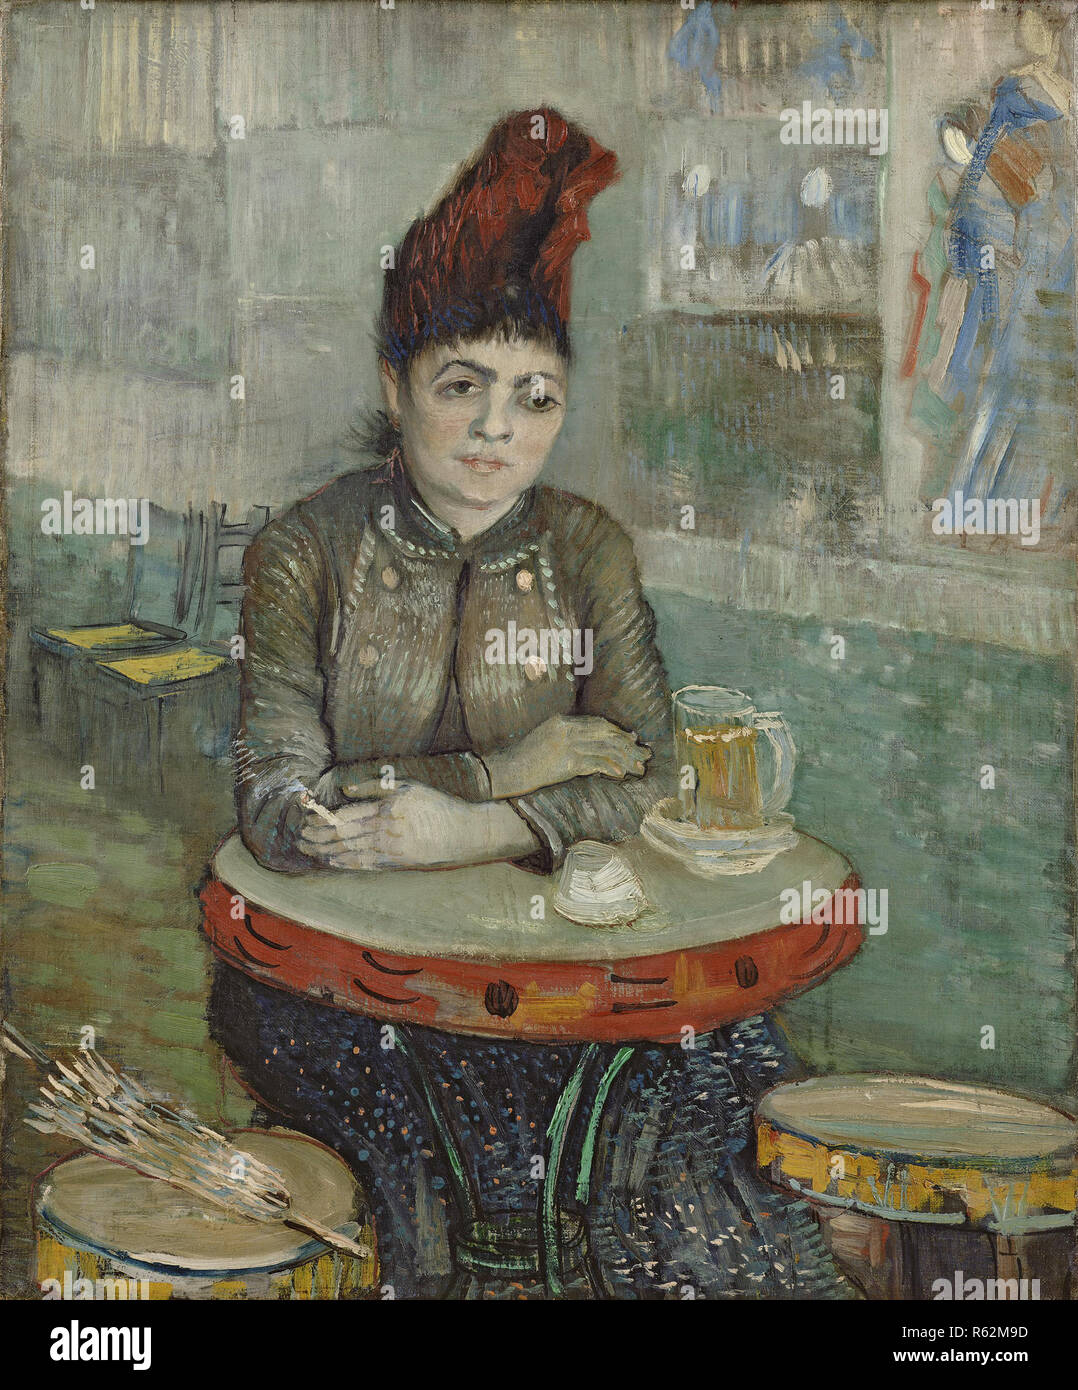 In het café: Agostina Segatori in Le tambourin / In the café: Agostina Segatori in Le tambourin. Date/Period: From 1887 until 1888. Painting. Oil on canvas. Height: 55.5 cm (21.8 in); Width: 46.5 cm (18.3 in). Author: VINCENT VAN GOGH. VAN GOGH, VINCENT. Stock Photo